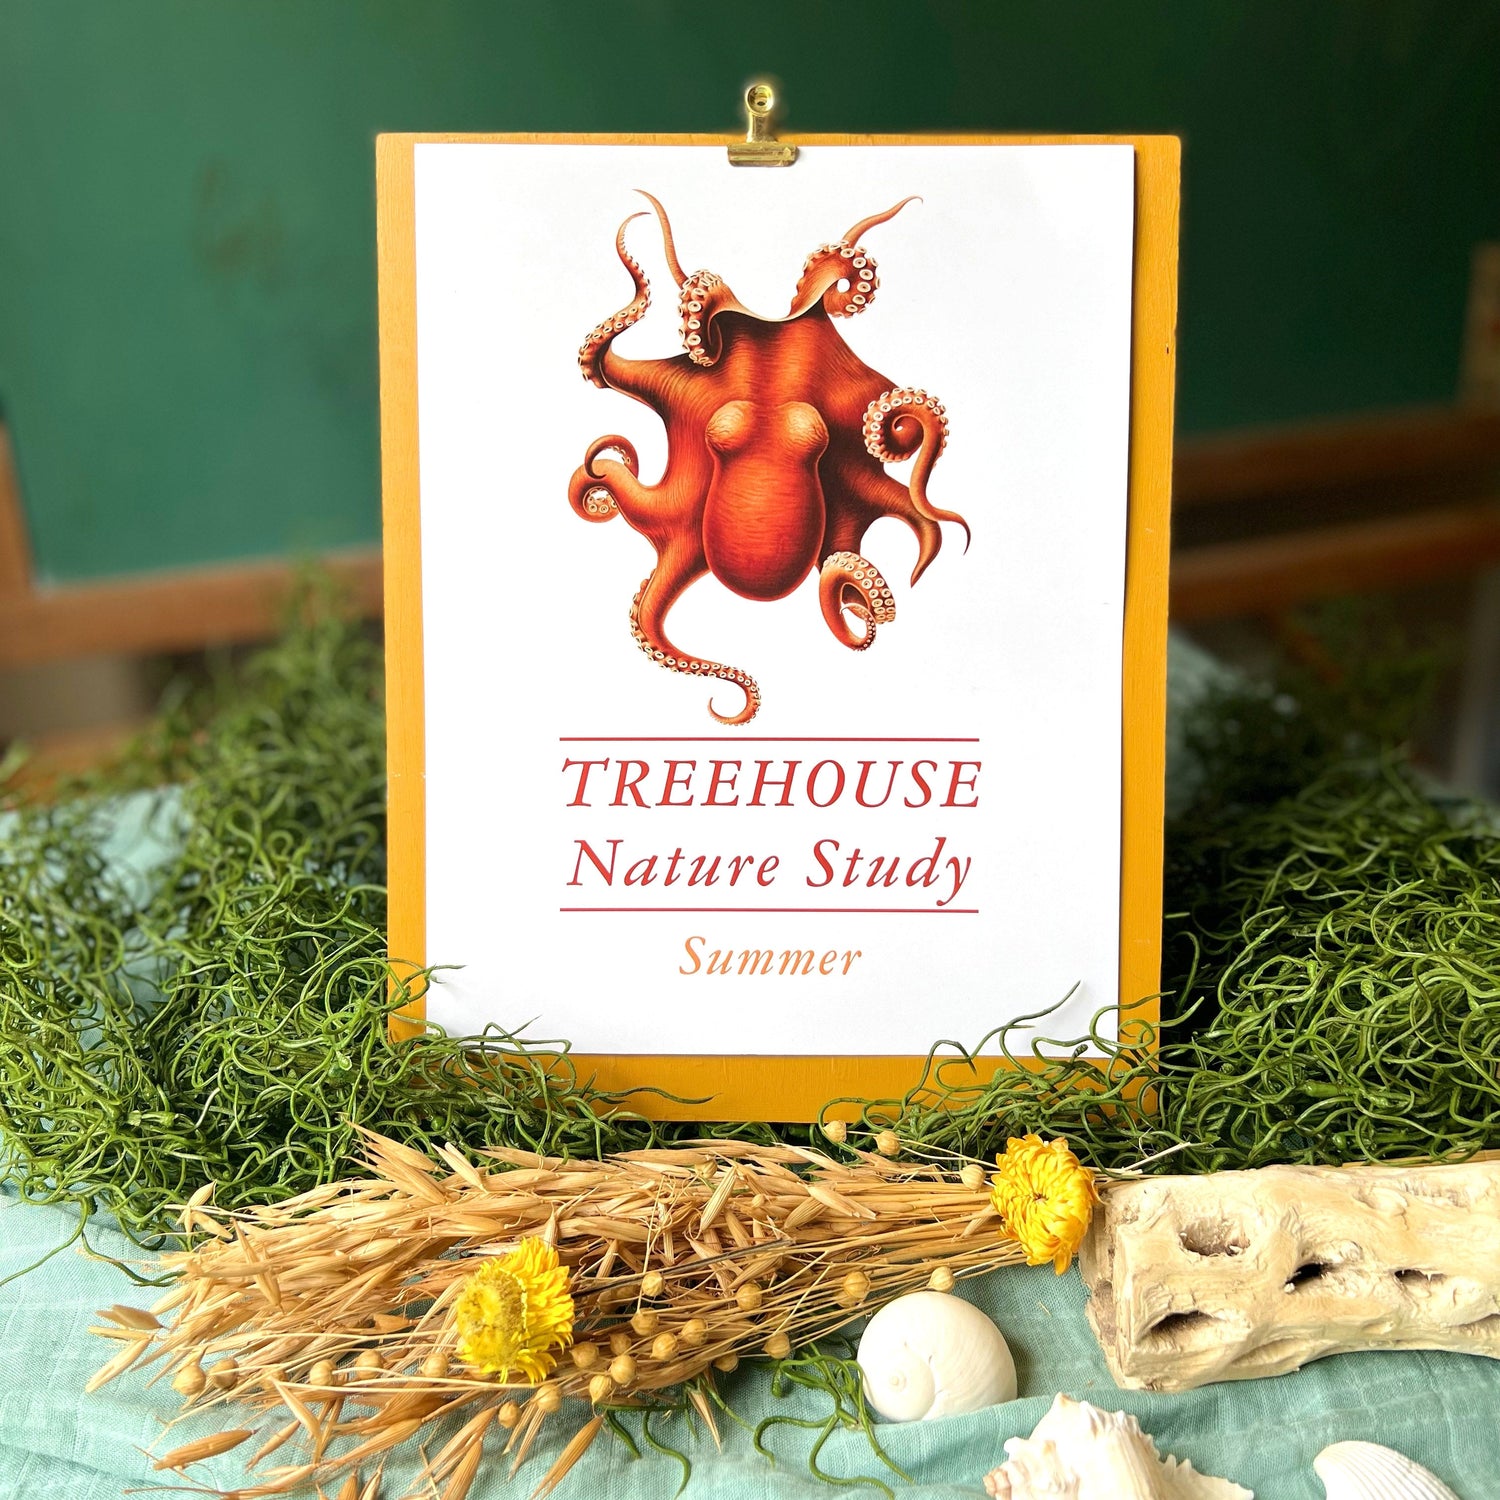 Treehouse Nature Study: Summer (Small Group License)